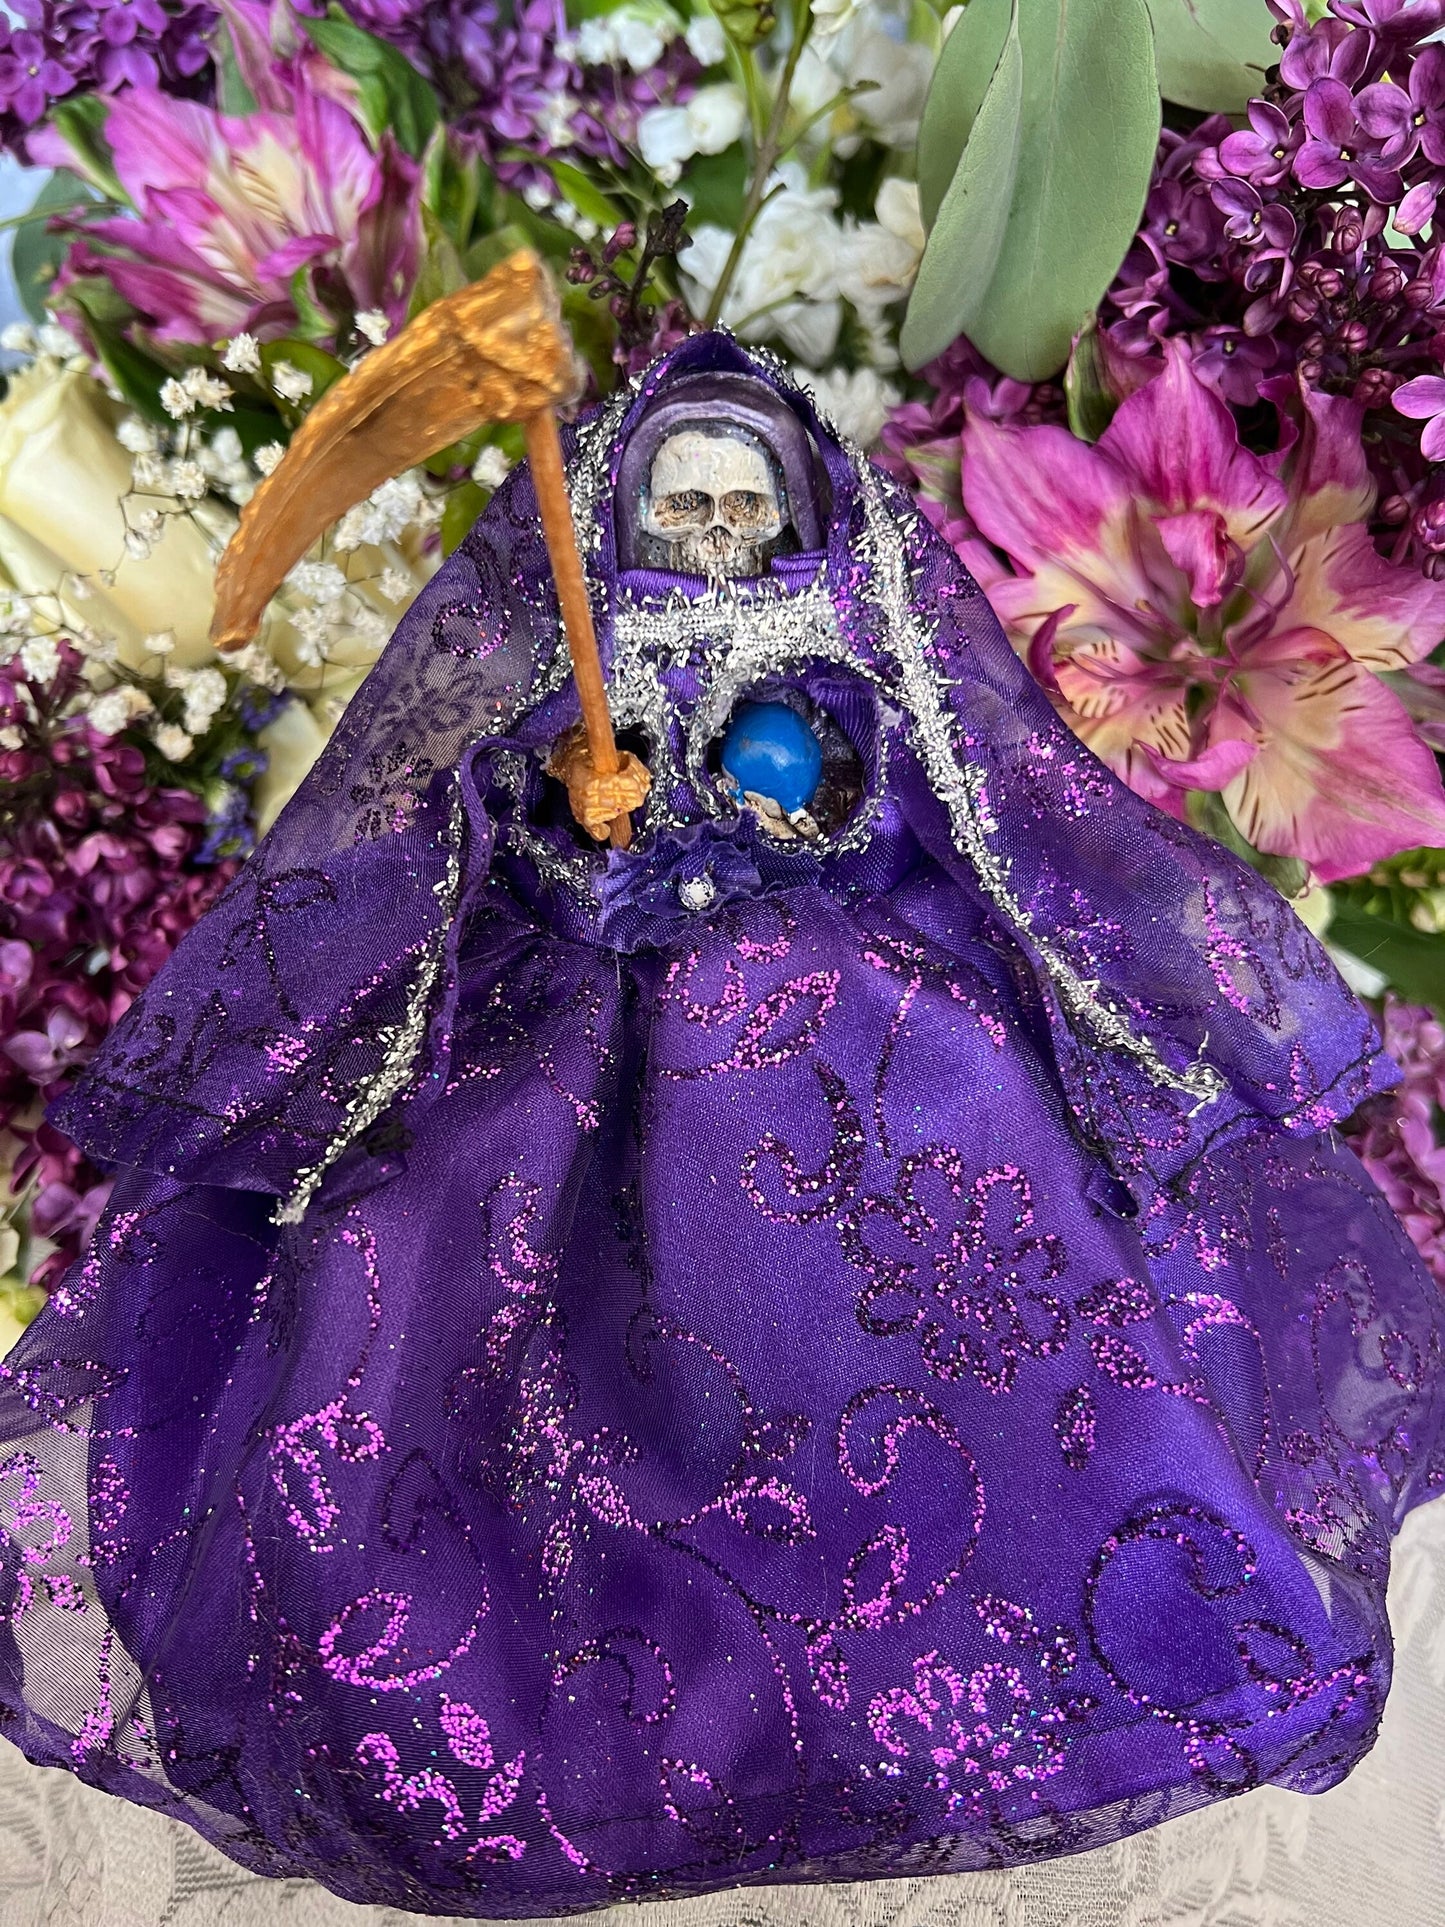 Santa Muerte Morada / Purple Statue with Dress + Baptized + Fixed + Made in Mexico + Psychic + Healing + Spirituality + 24K Gold Leaf